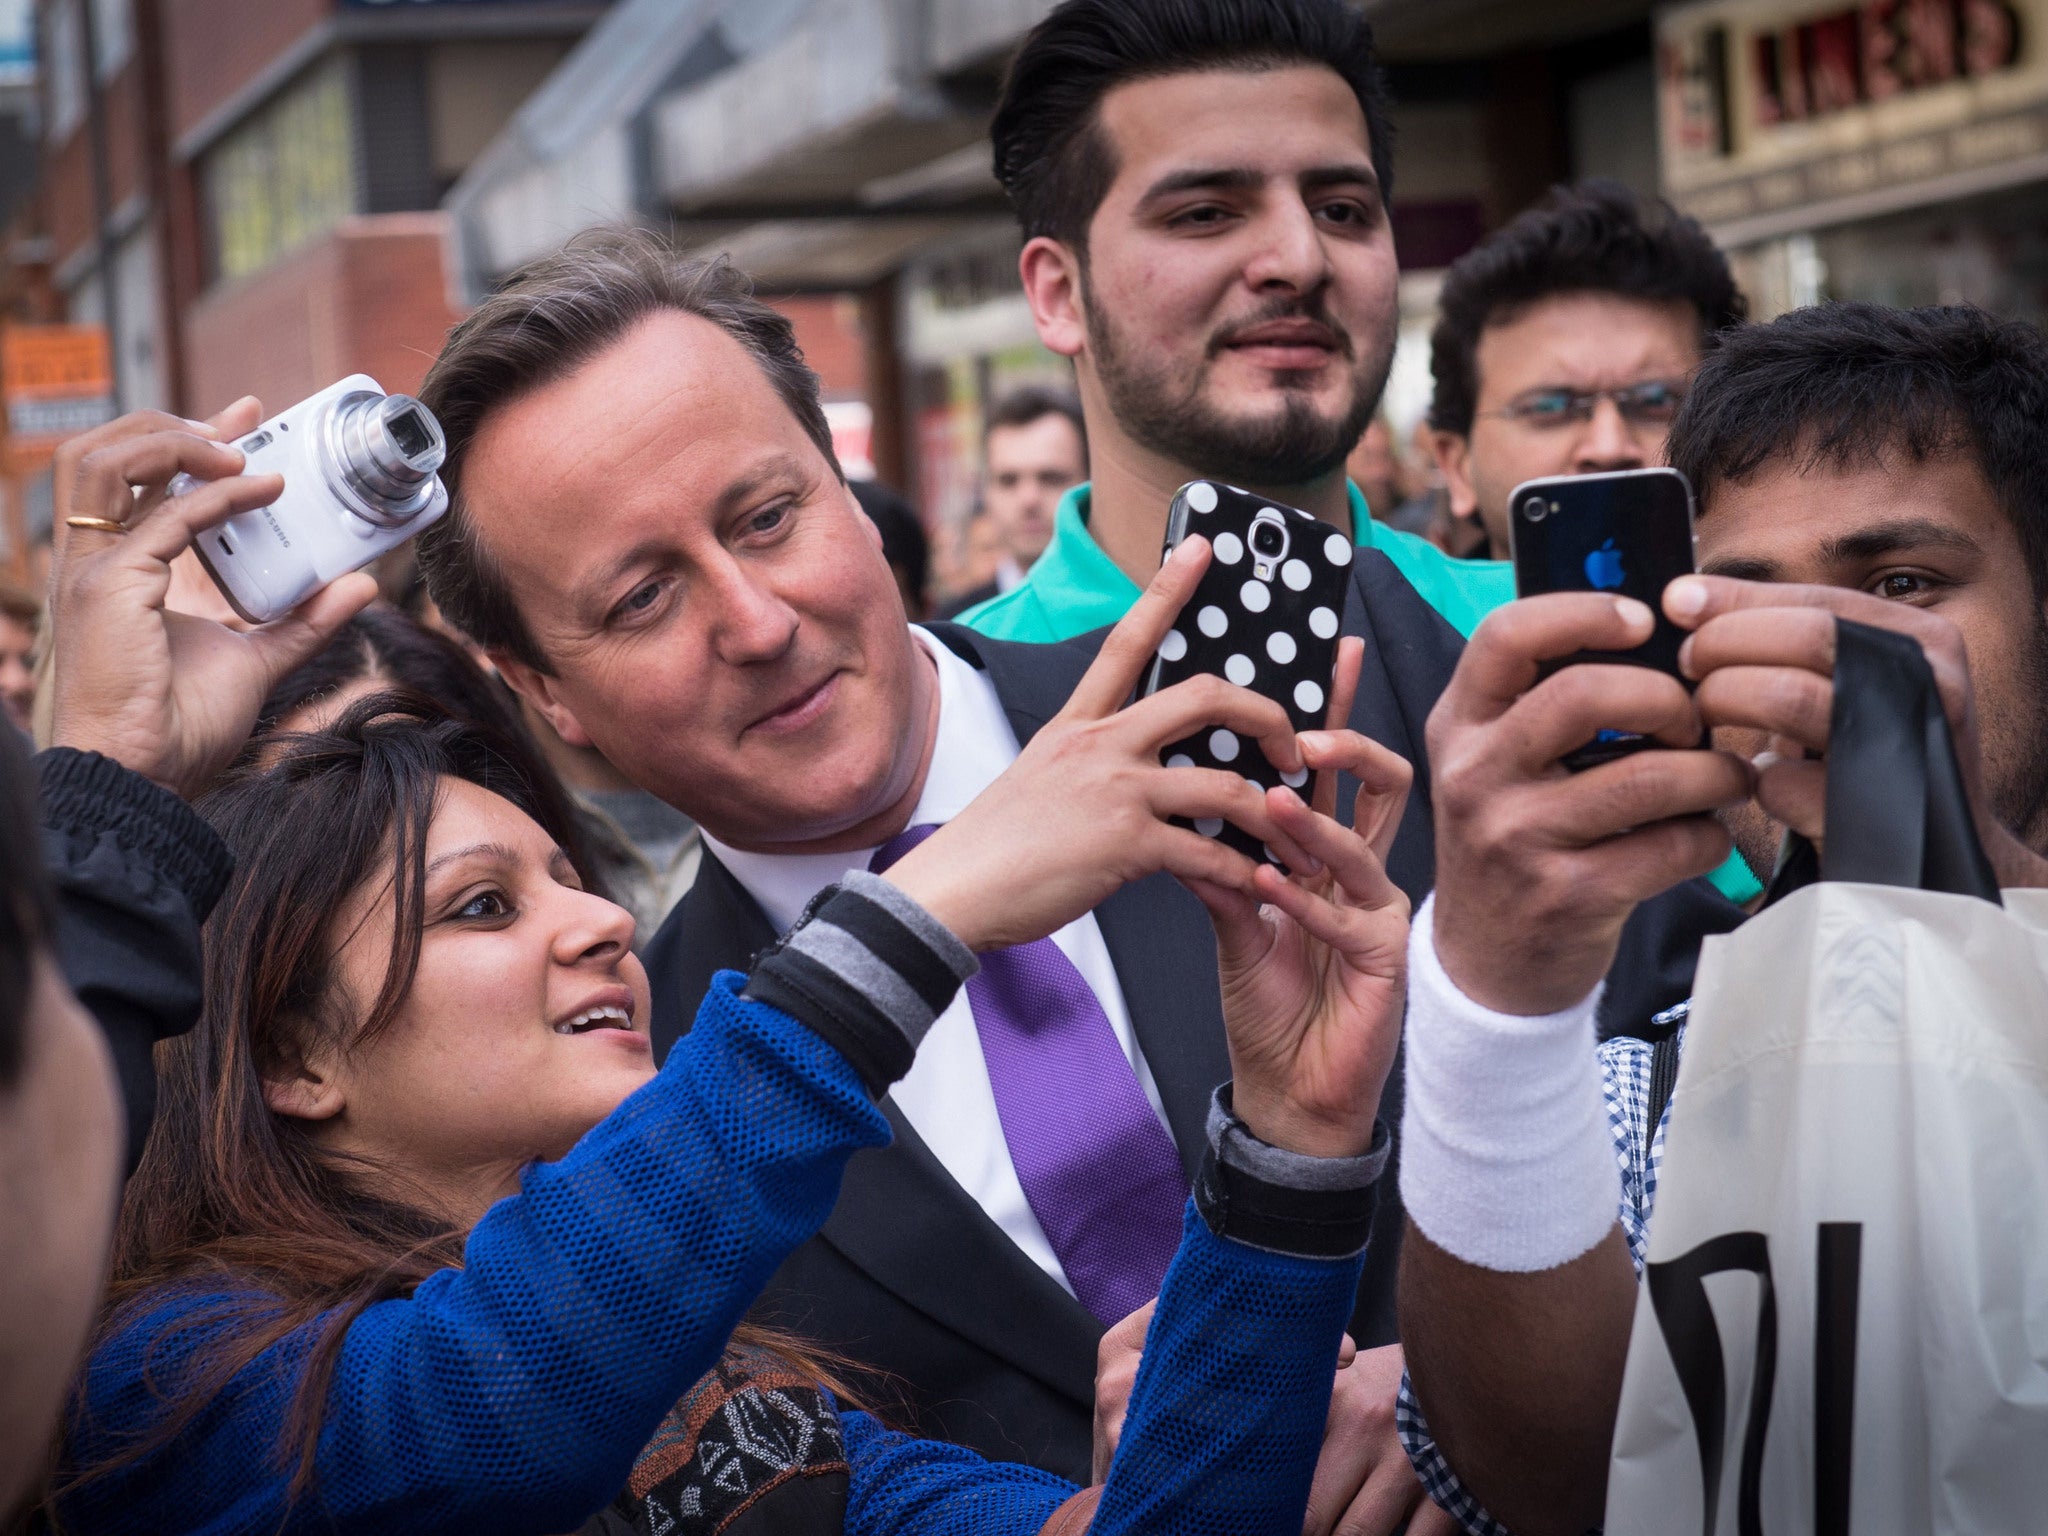 The Prime Minister hopes that meeting voters face to face will boost his poll ratings